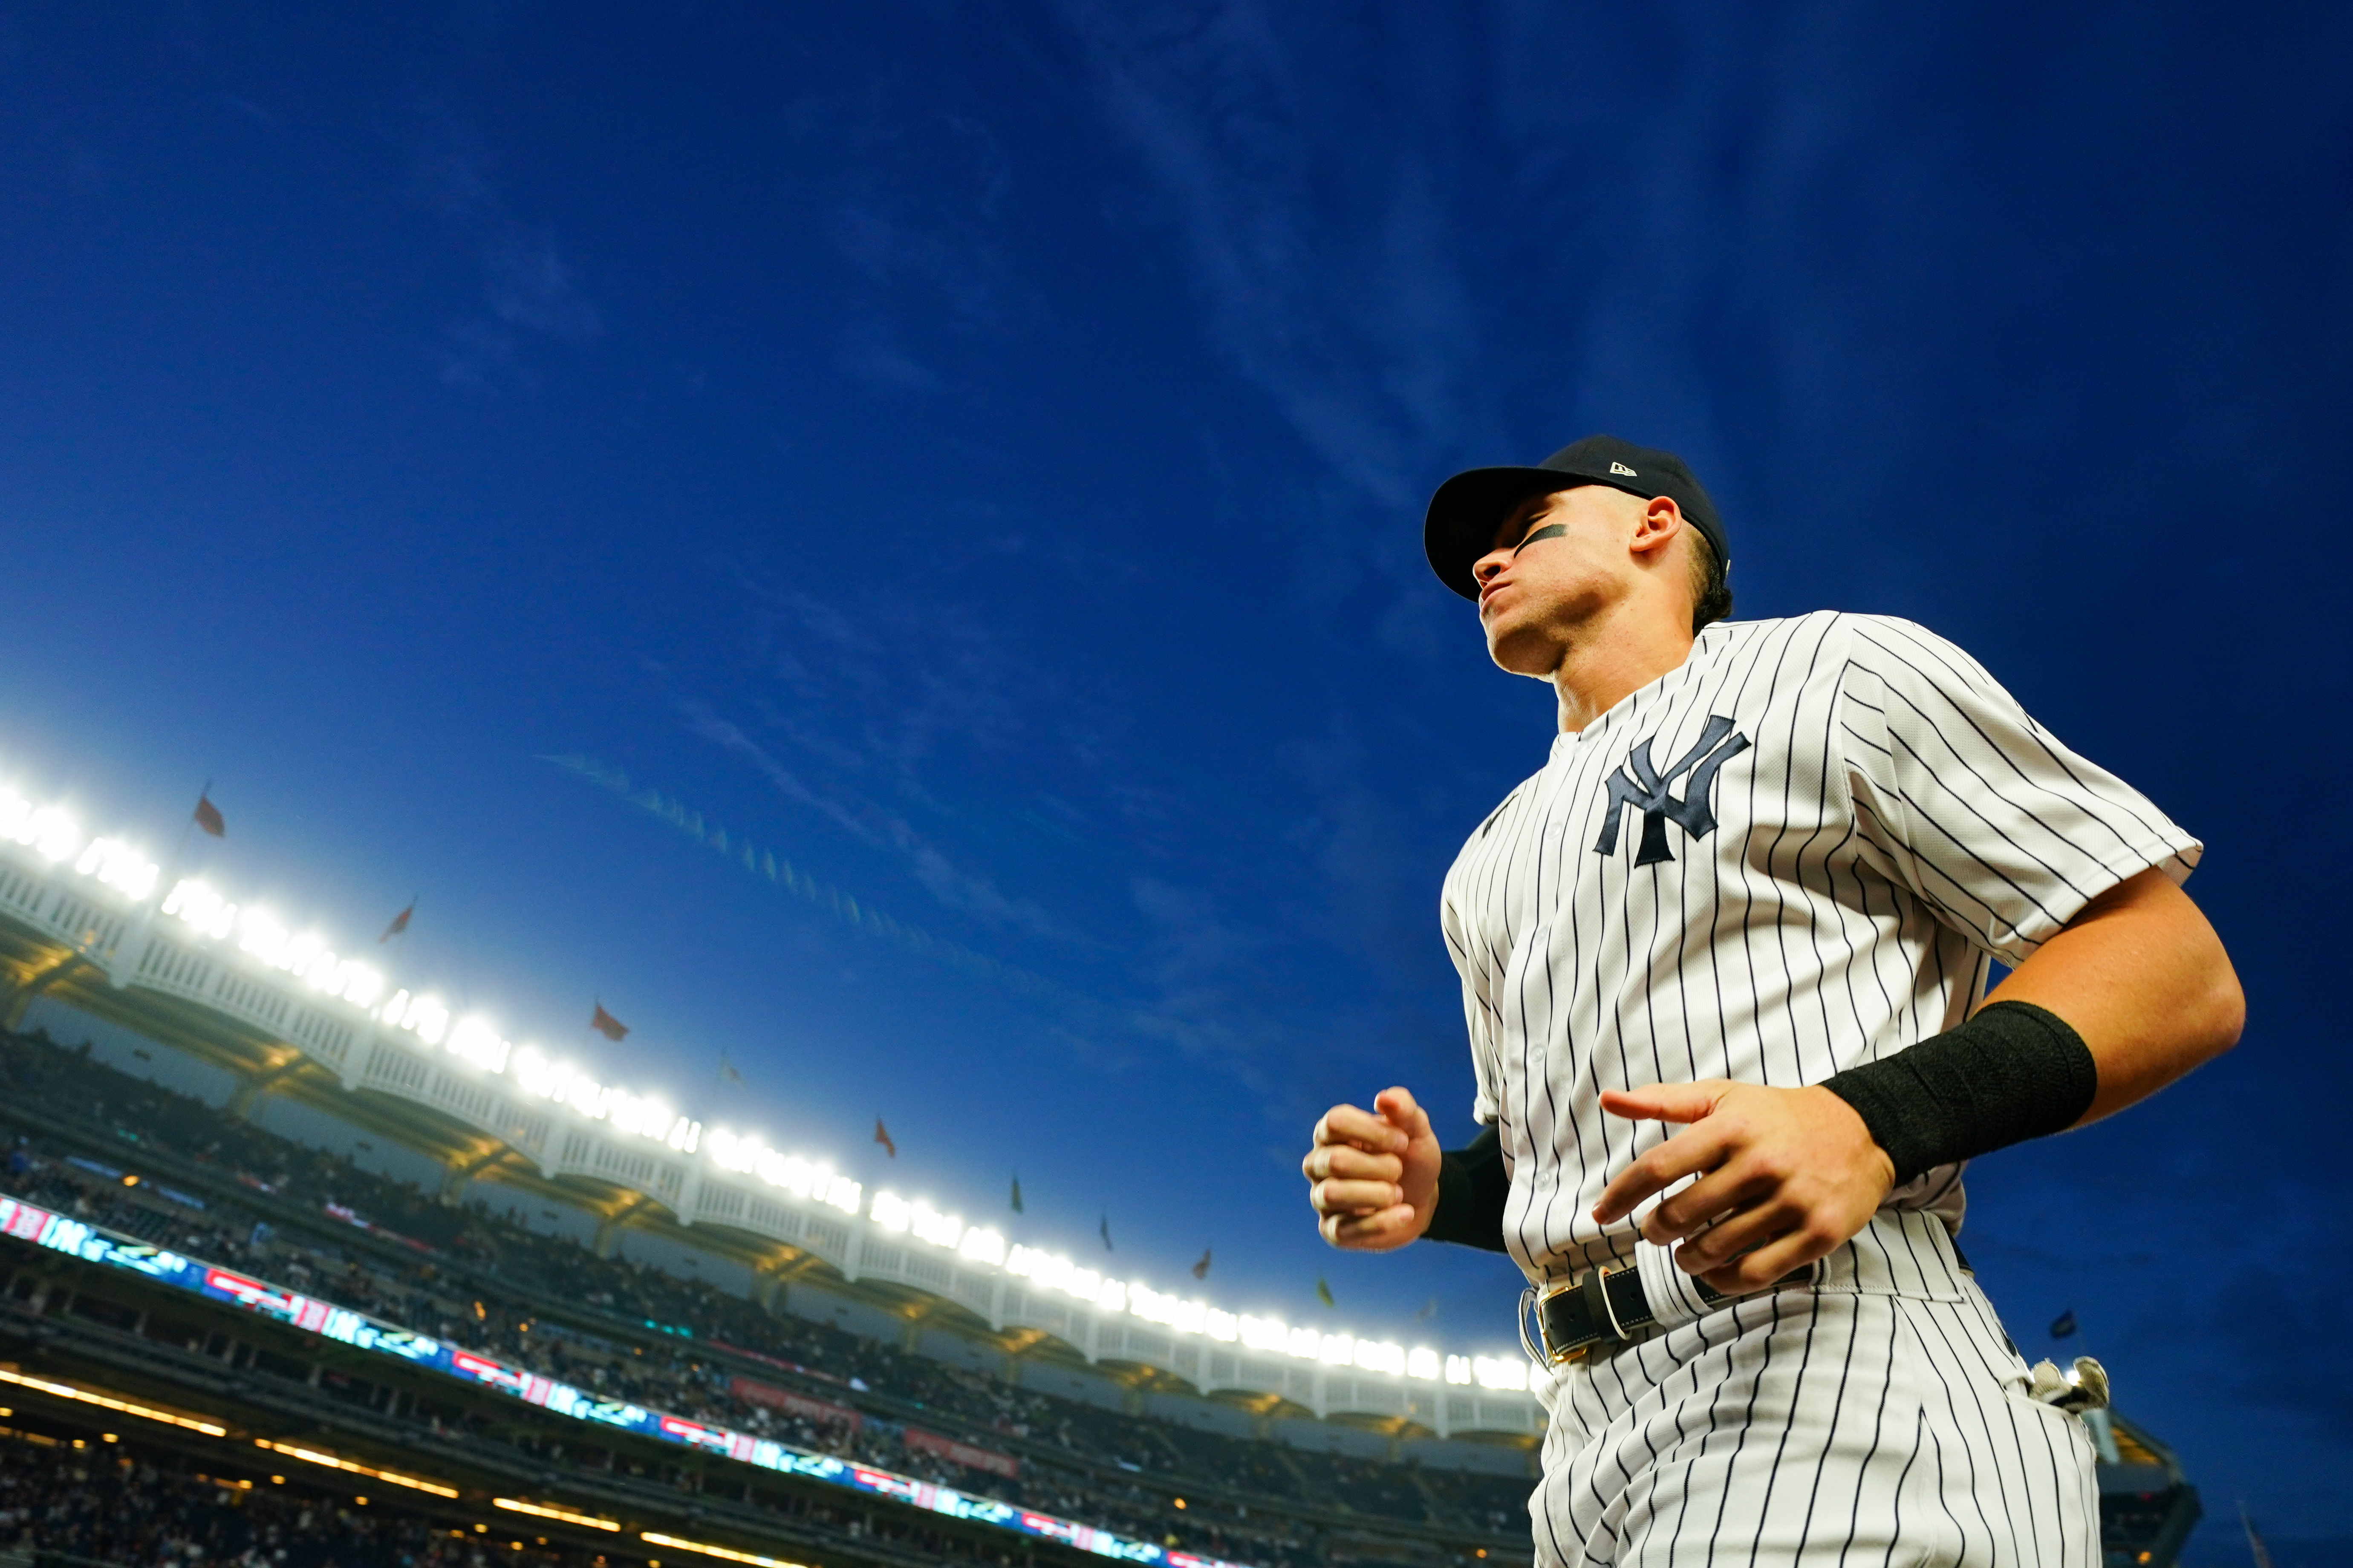 Aaron Judge Will Be the Next Captain of the New York Yankees